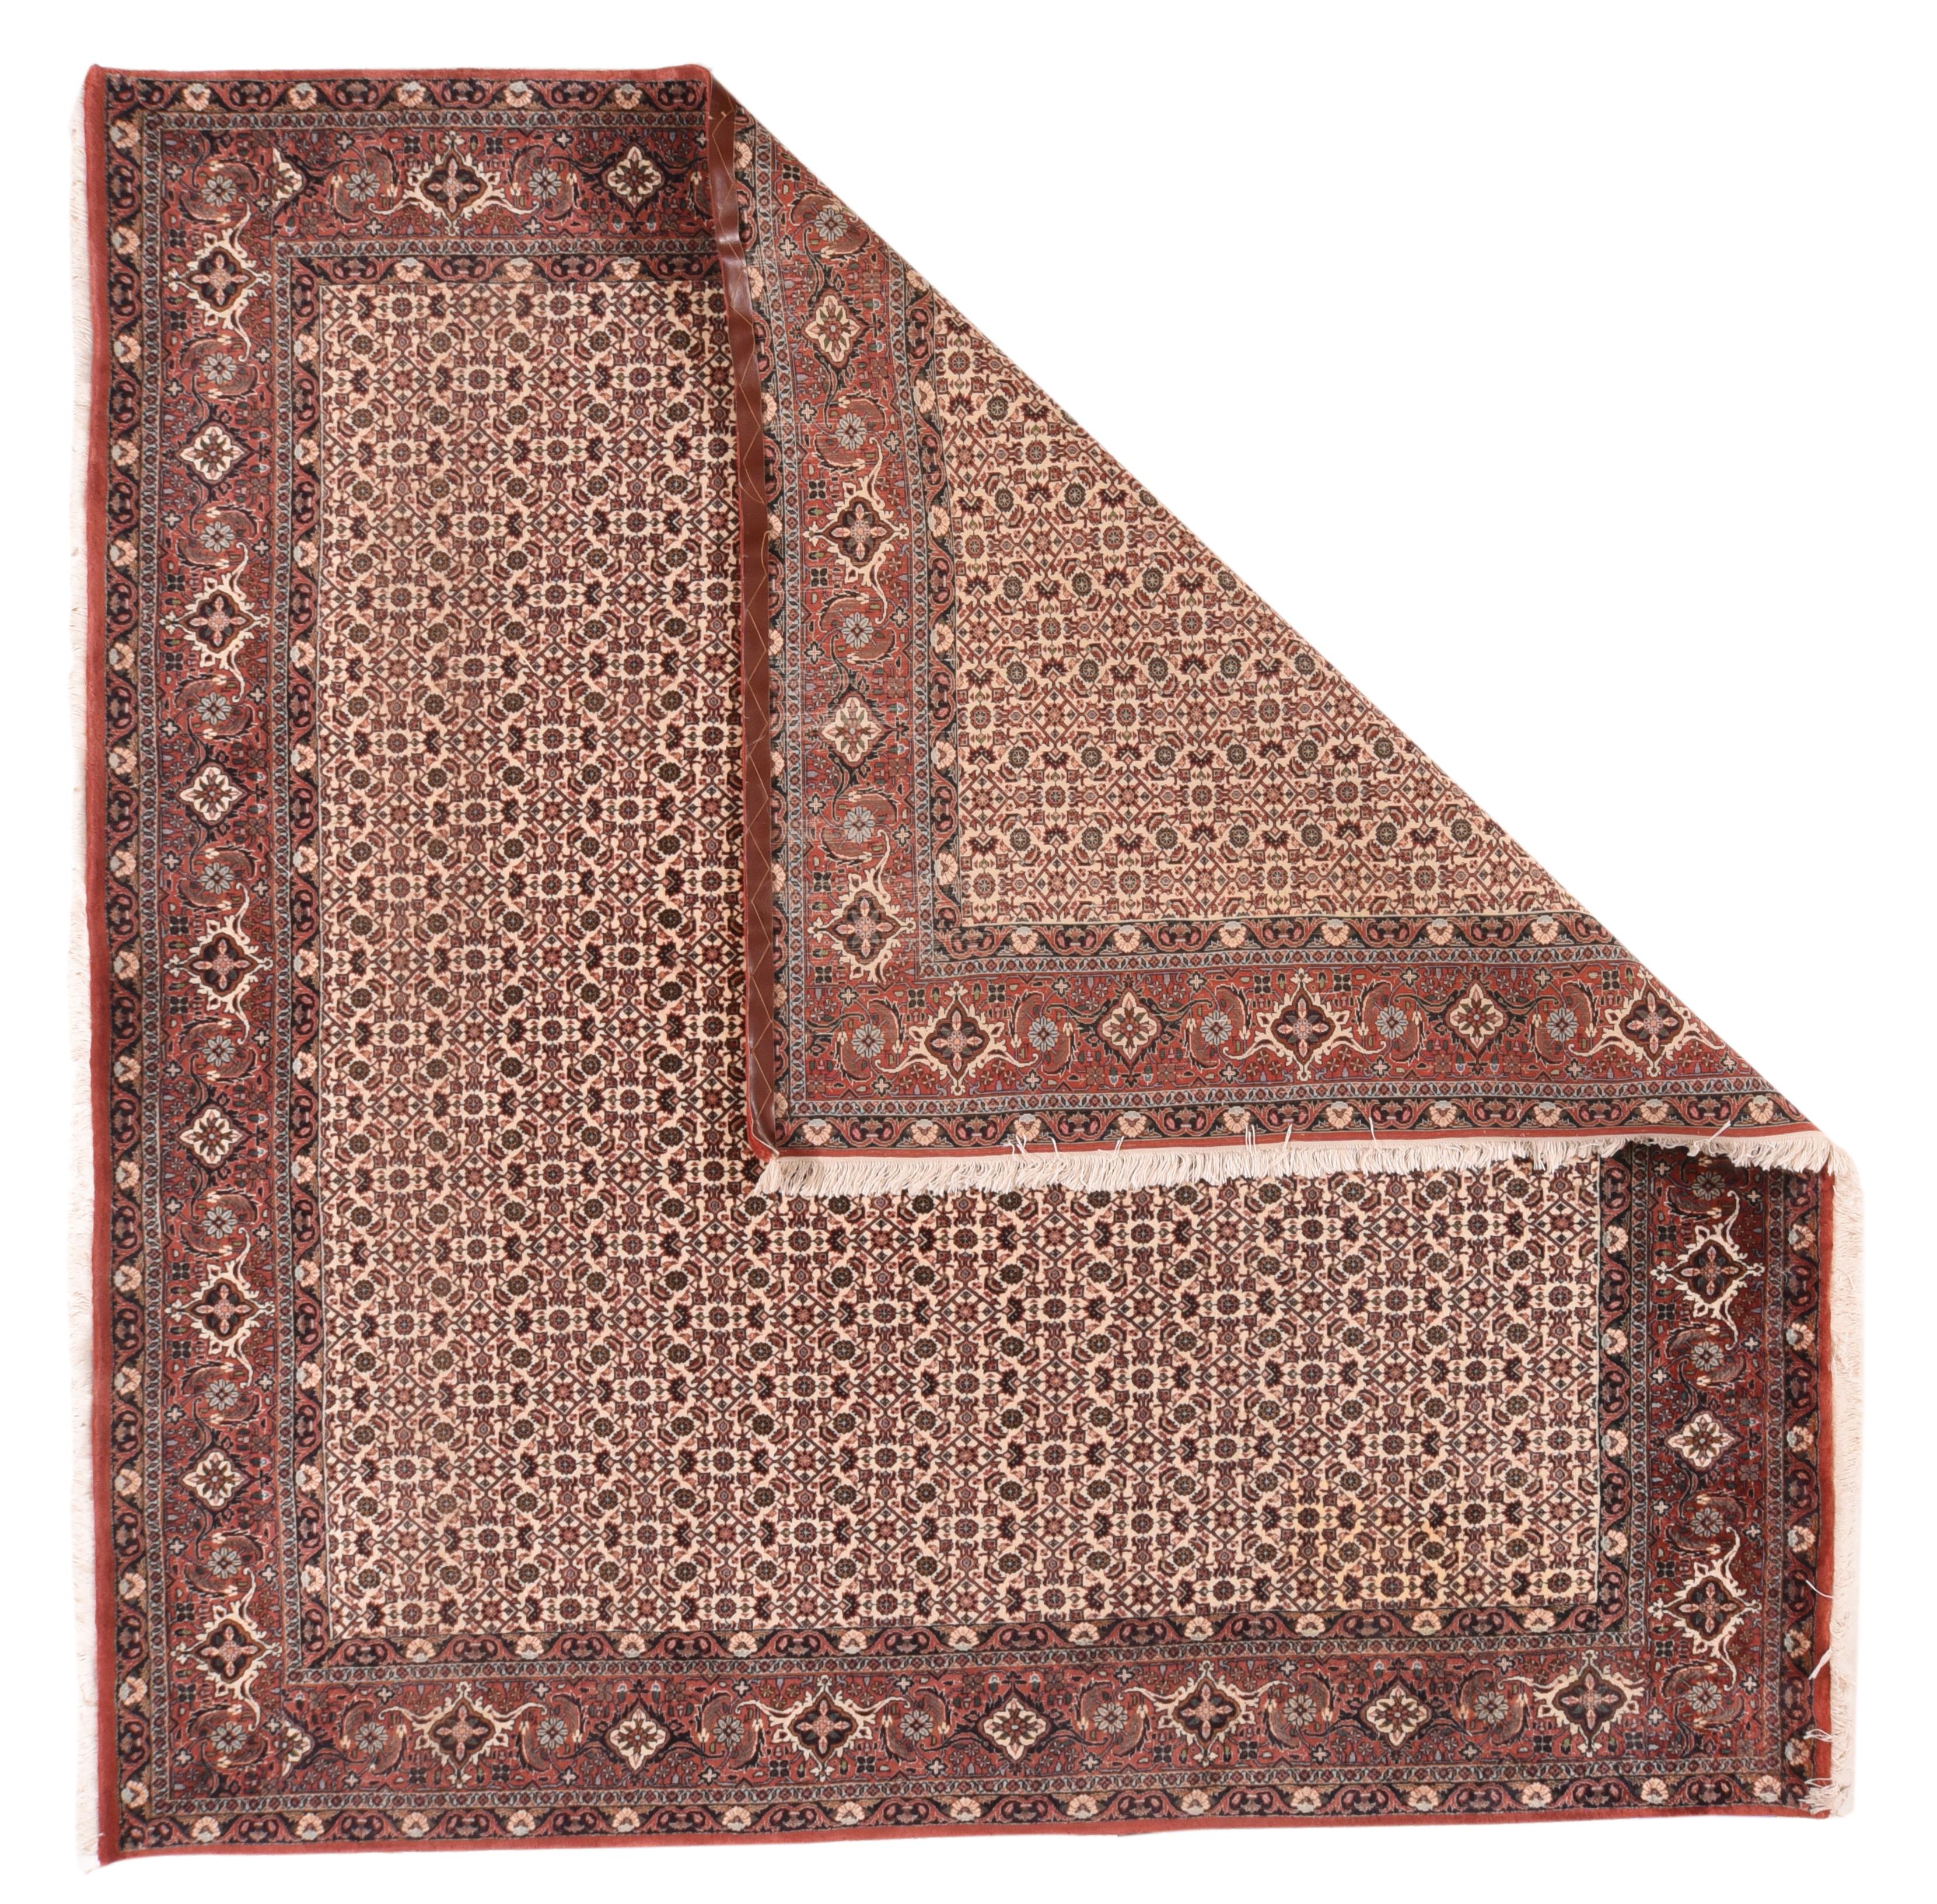 This modern Kurdish town rug of uncommon format, shows an ecru field very evenly patterned with a formal, small-scale allover Herati design, within a border system including a coral red main stripe with a reversing ragged turtle palmette pattern.